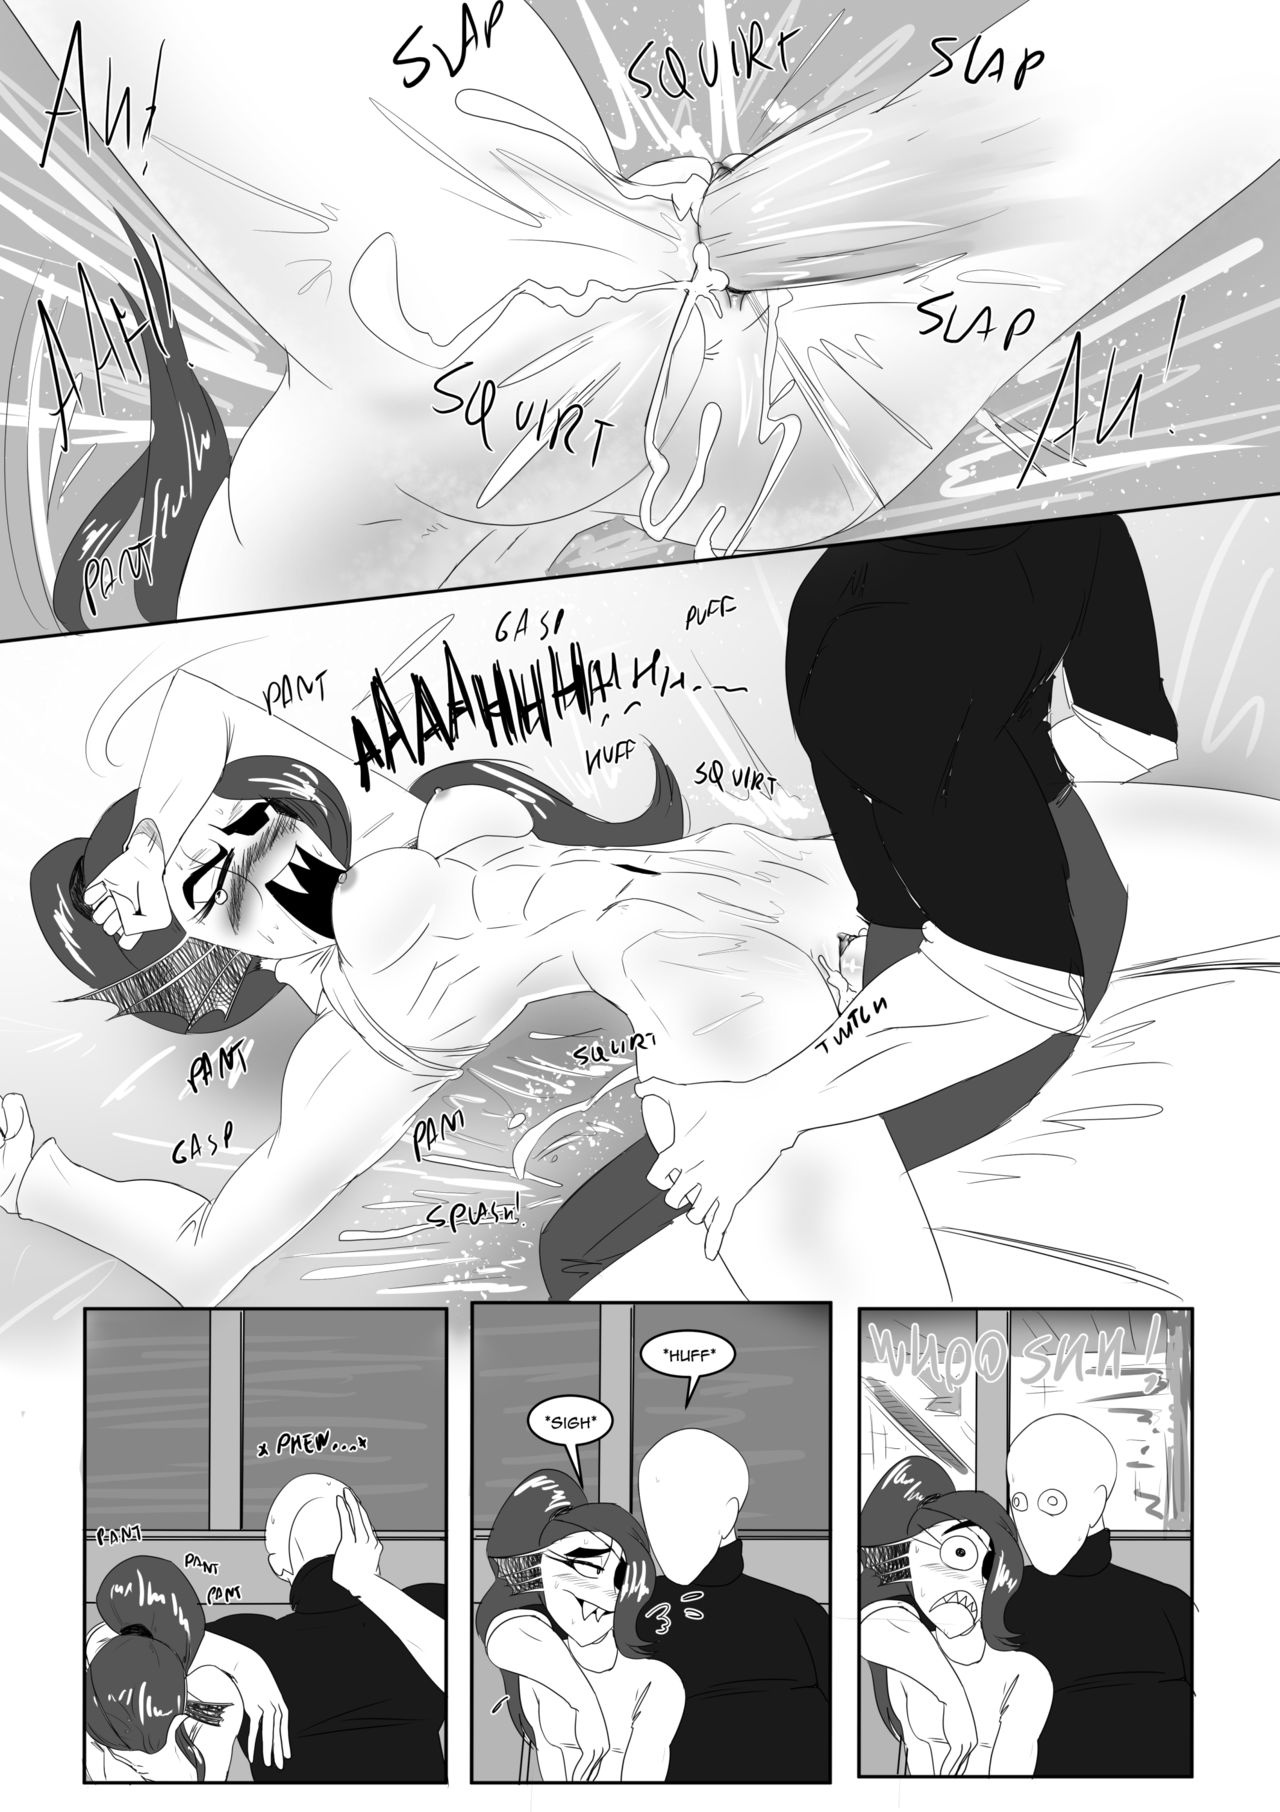 Spear of Just Us 2 - Battle Against a True Nympho porn comics Oral sex, Anal Sex, Cosplay, Monster Girls, Stockings